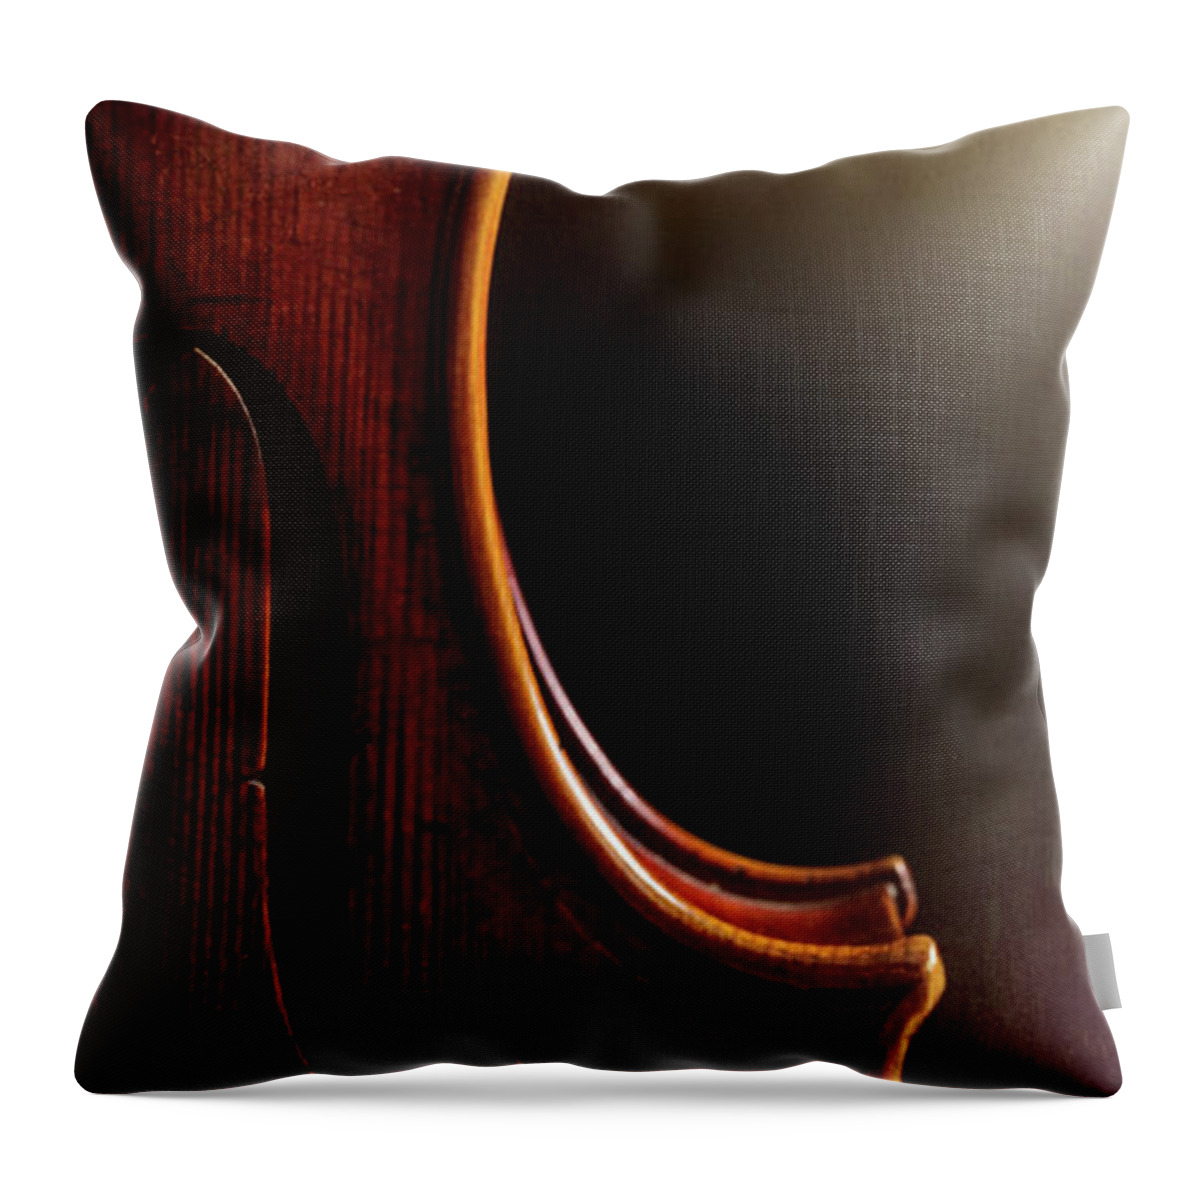 Violin Throw Pillow featuring the photograph Antique Violin 1732.01 by M K Miller